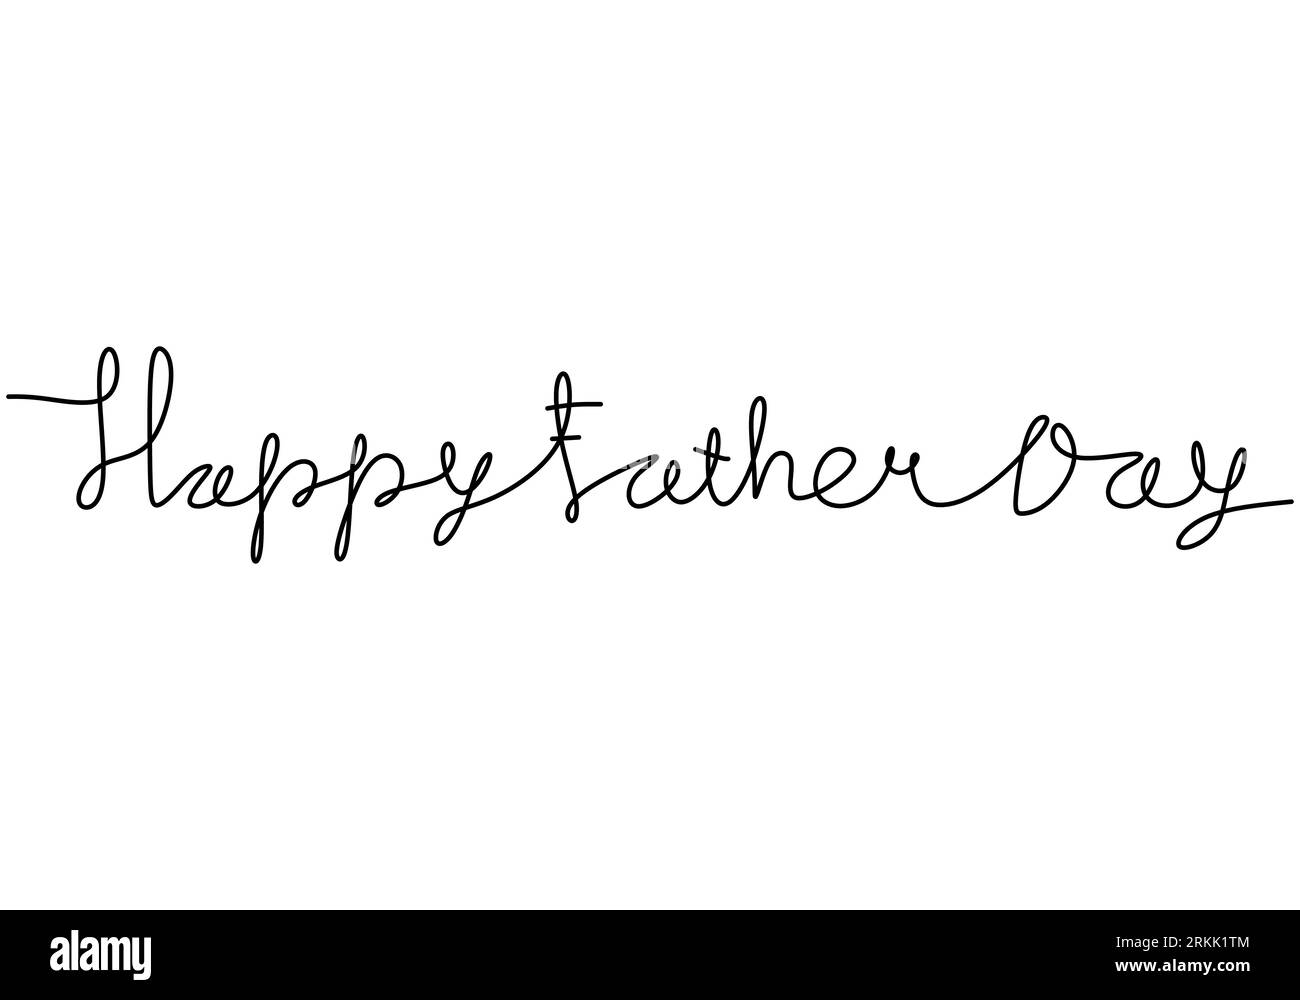 Happy Father's Day lettering one continuous line art isolated on white background. Happy motivation and inspiration message concept. Vector illustrati Stock Vector